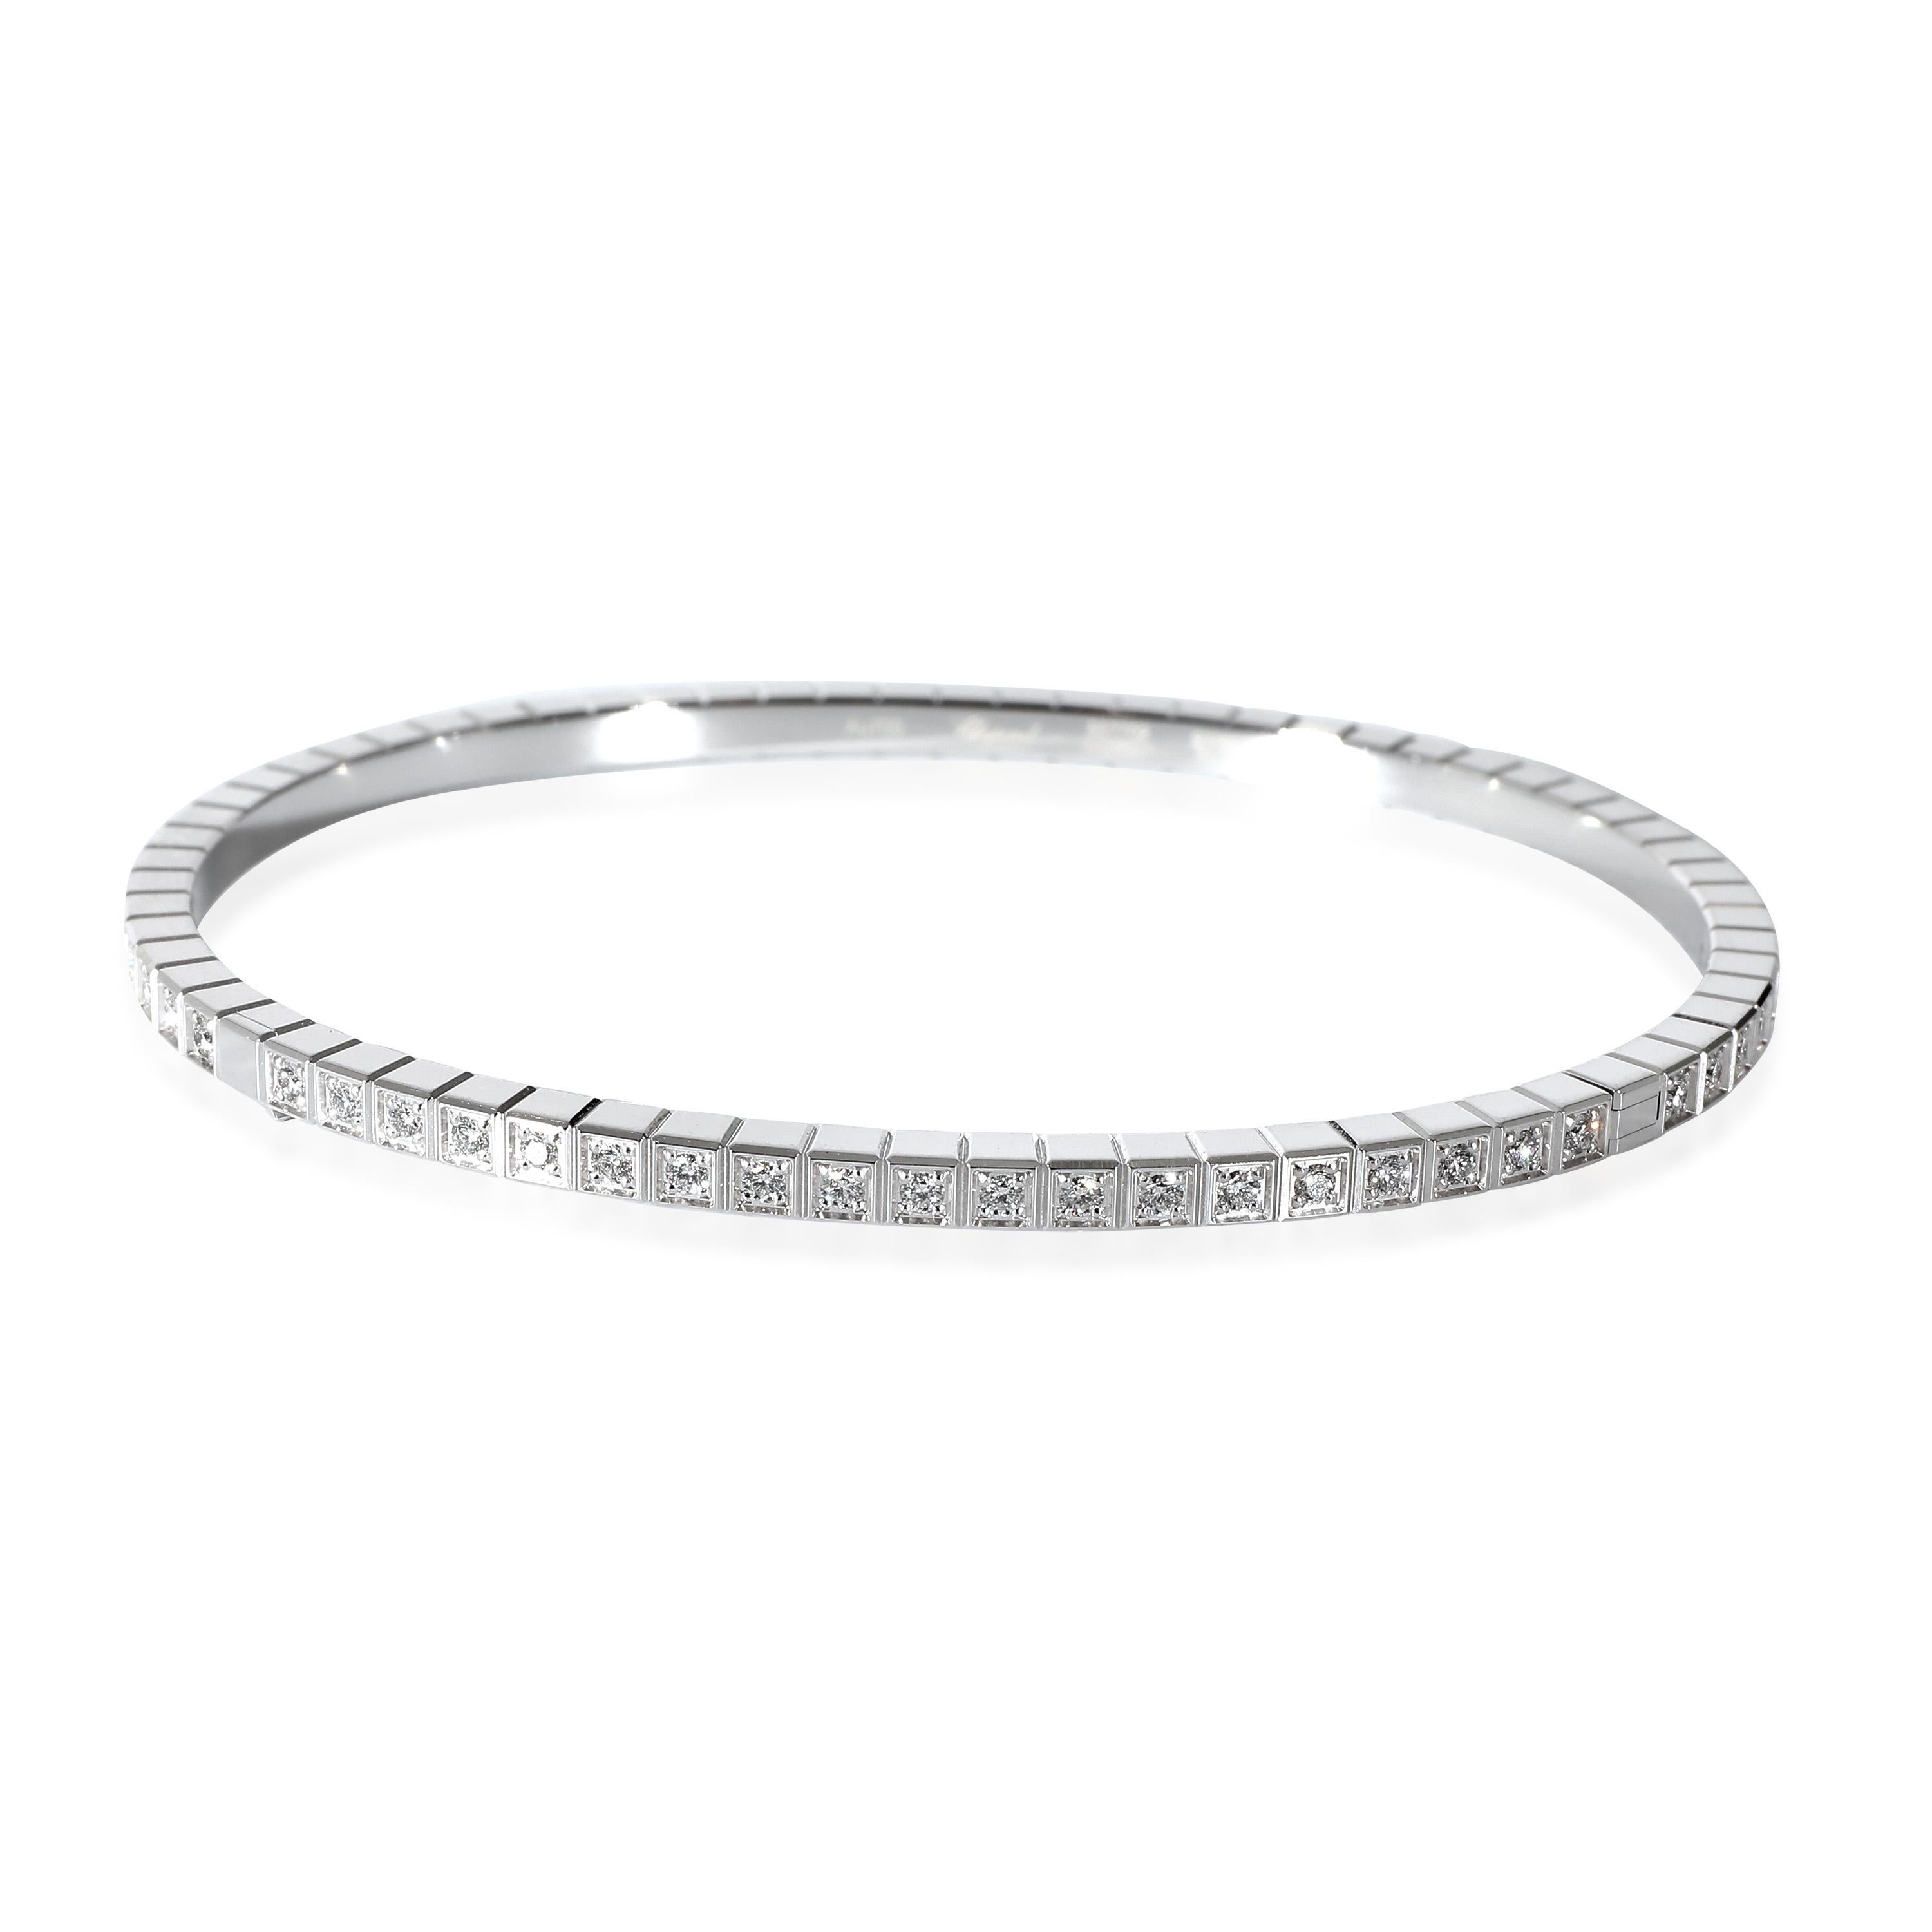 Chopard Ice Cube Eternity Diamond Bracelet in 18k White Gold 0.64 CTW

PRIMARY DETAILS
SKU: 134719
Listing Title: Chopard Ice Cube Eternity Diamond Bracelet in 18k White Gold 0.64 CTW
Condition Description: Retails for 10300 USD. In excellent